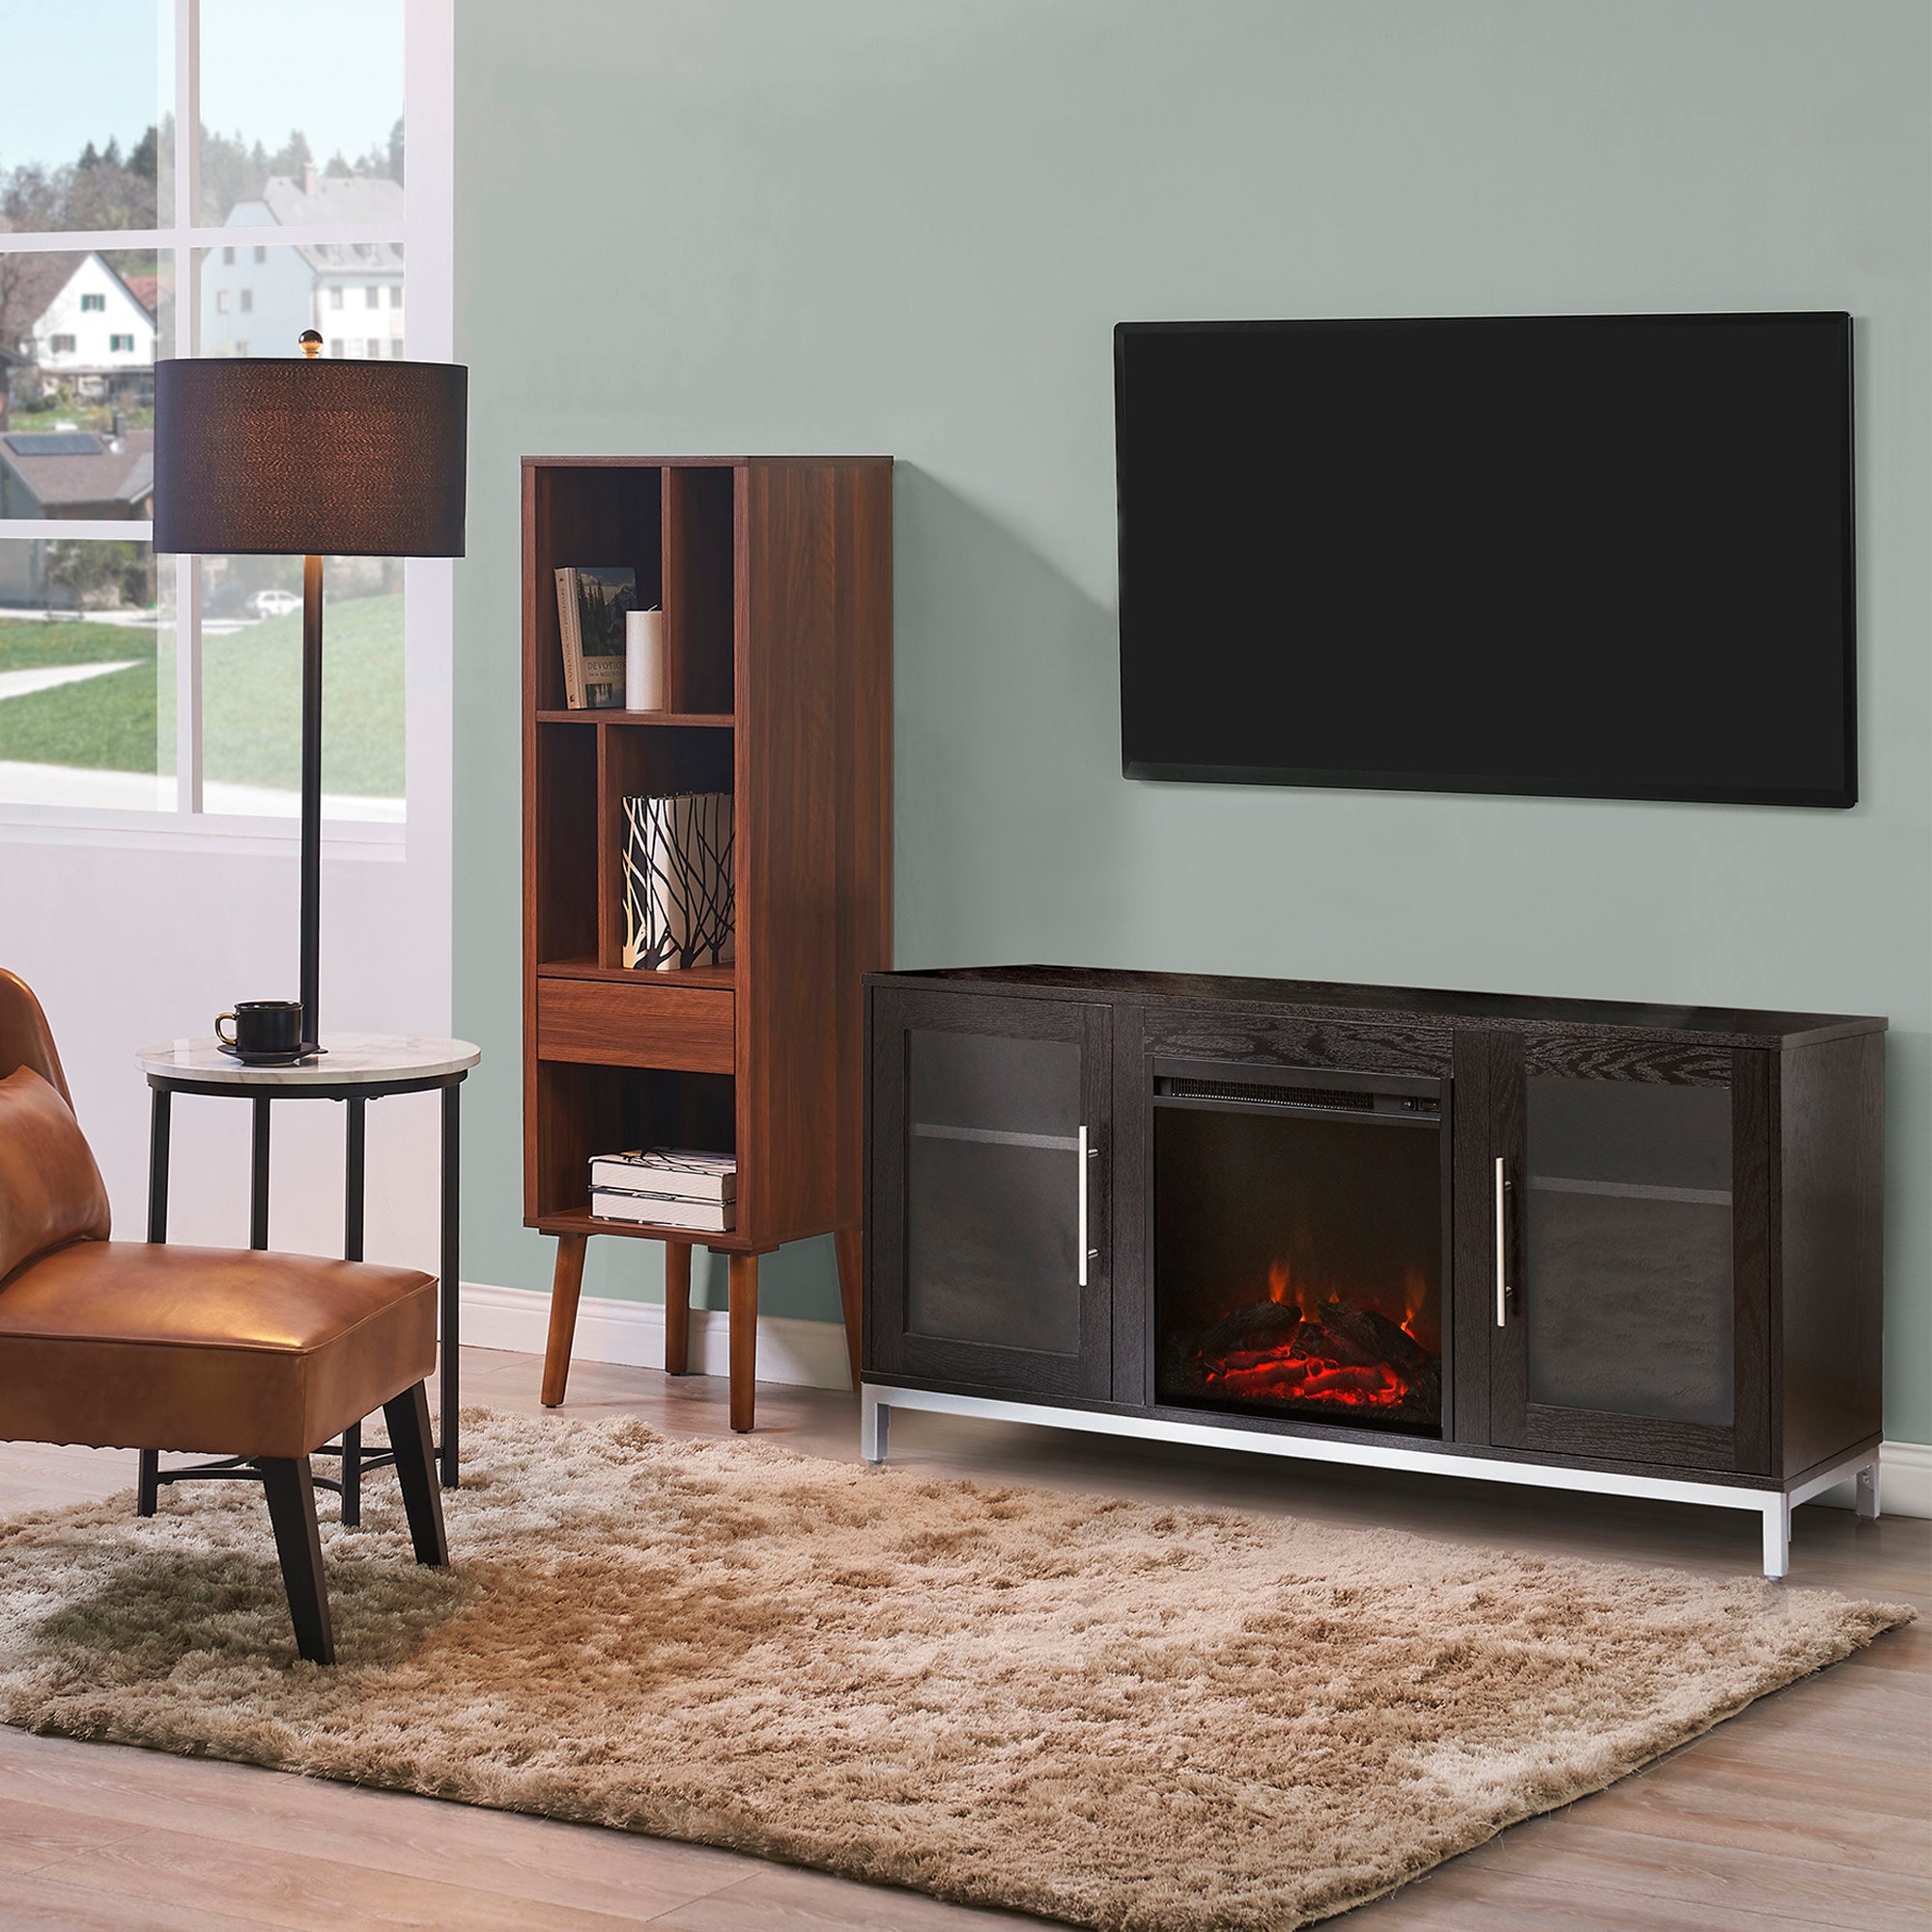 Teamson Home Lainey 54" TV Console Stand with Electric Fireplace for Flat Screen TVs up to 65", Black/Silver